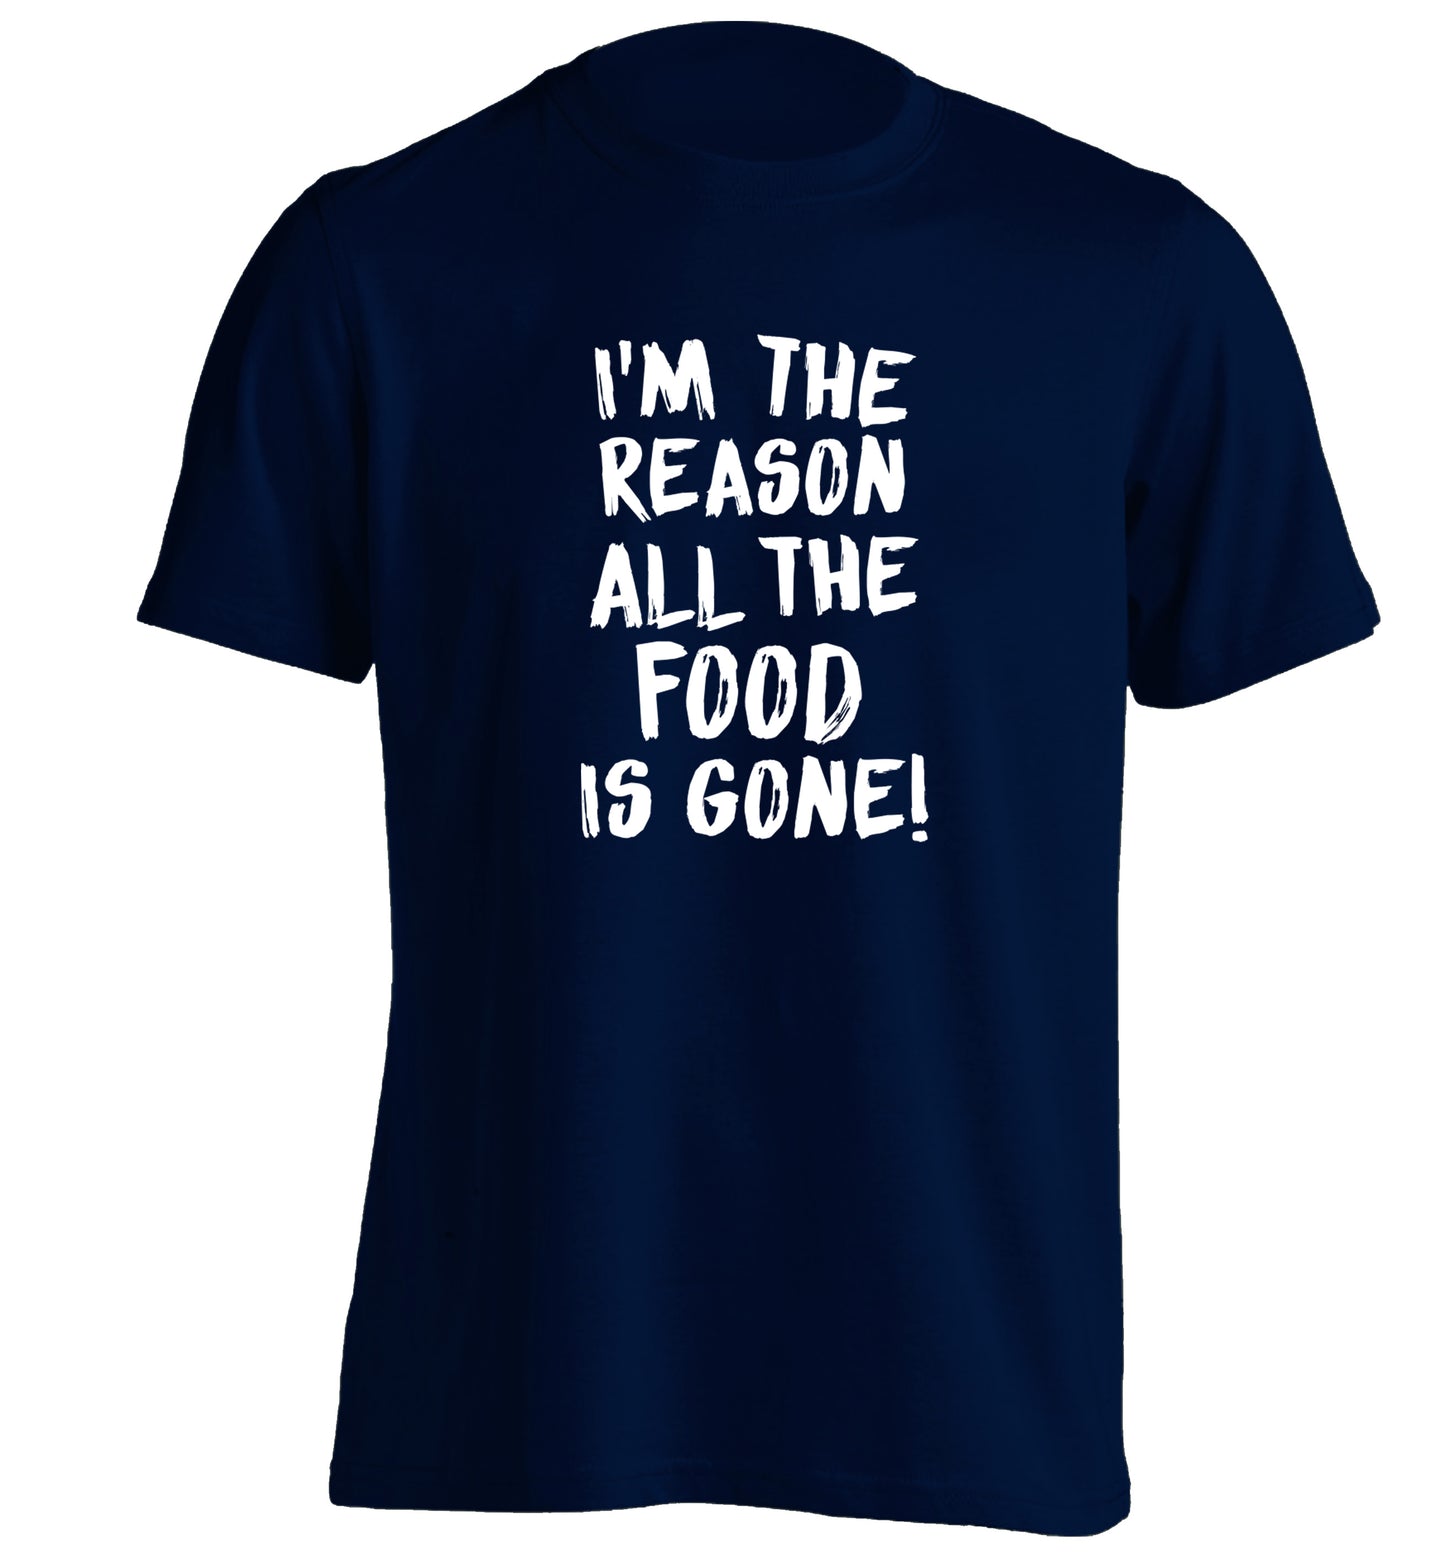 I'm the reason why all the food is gone adults unisex navy Tshirt 2XL